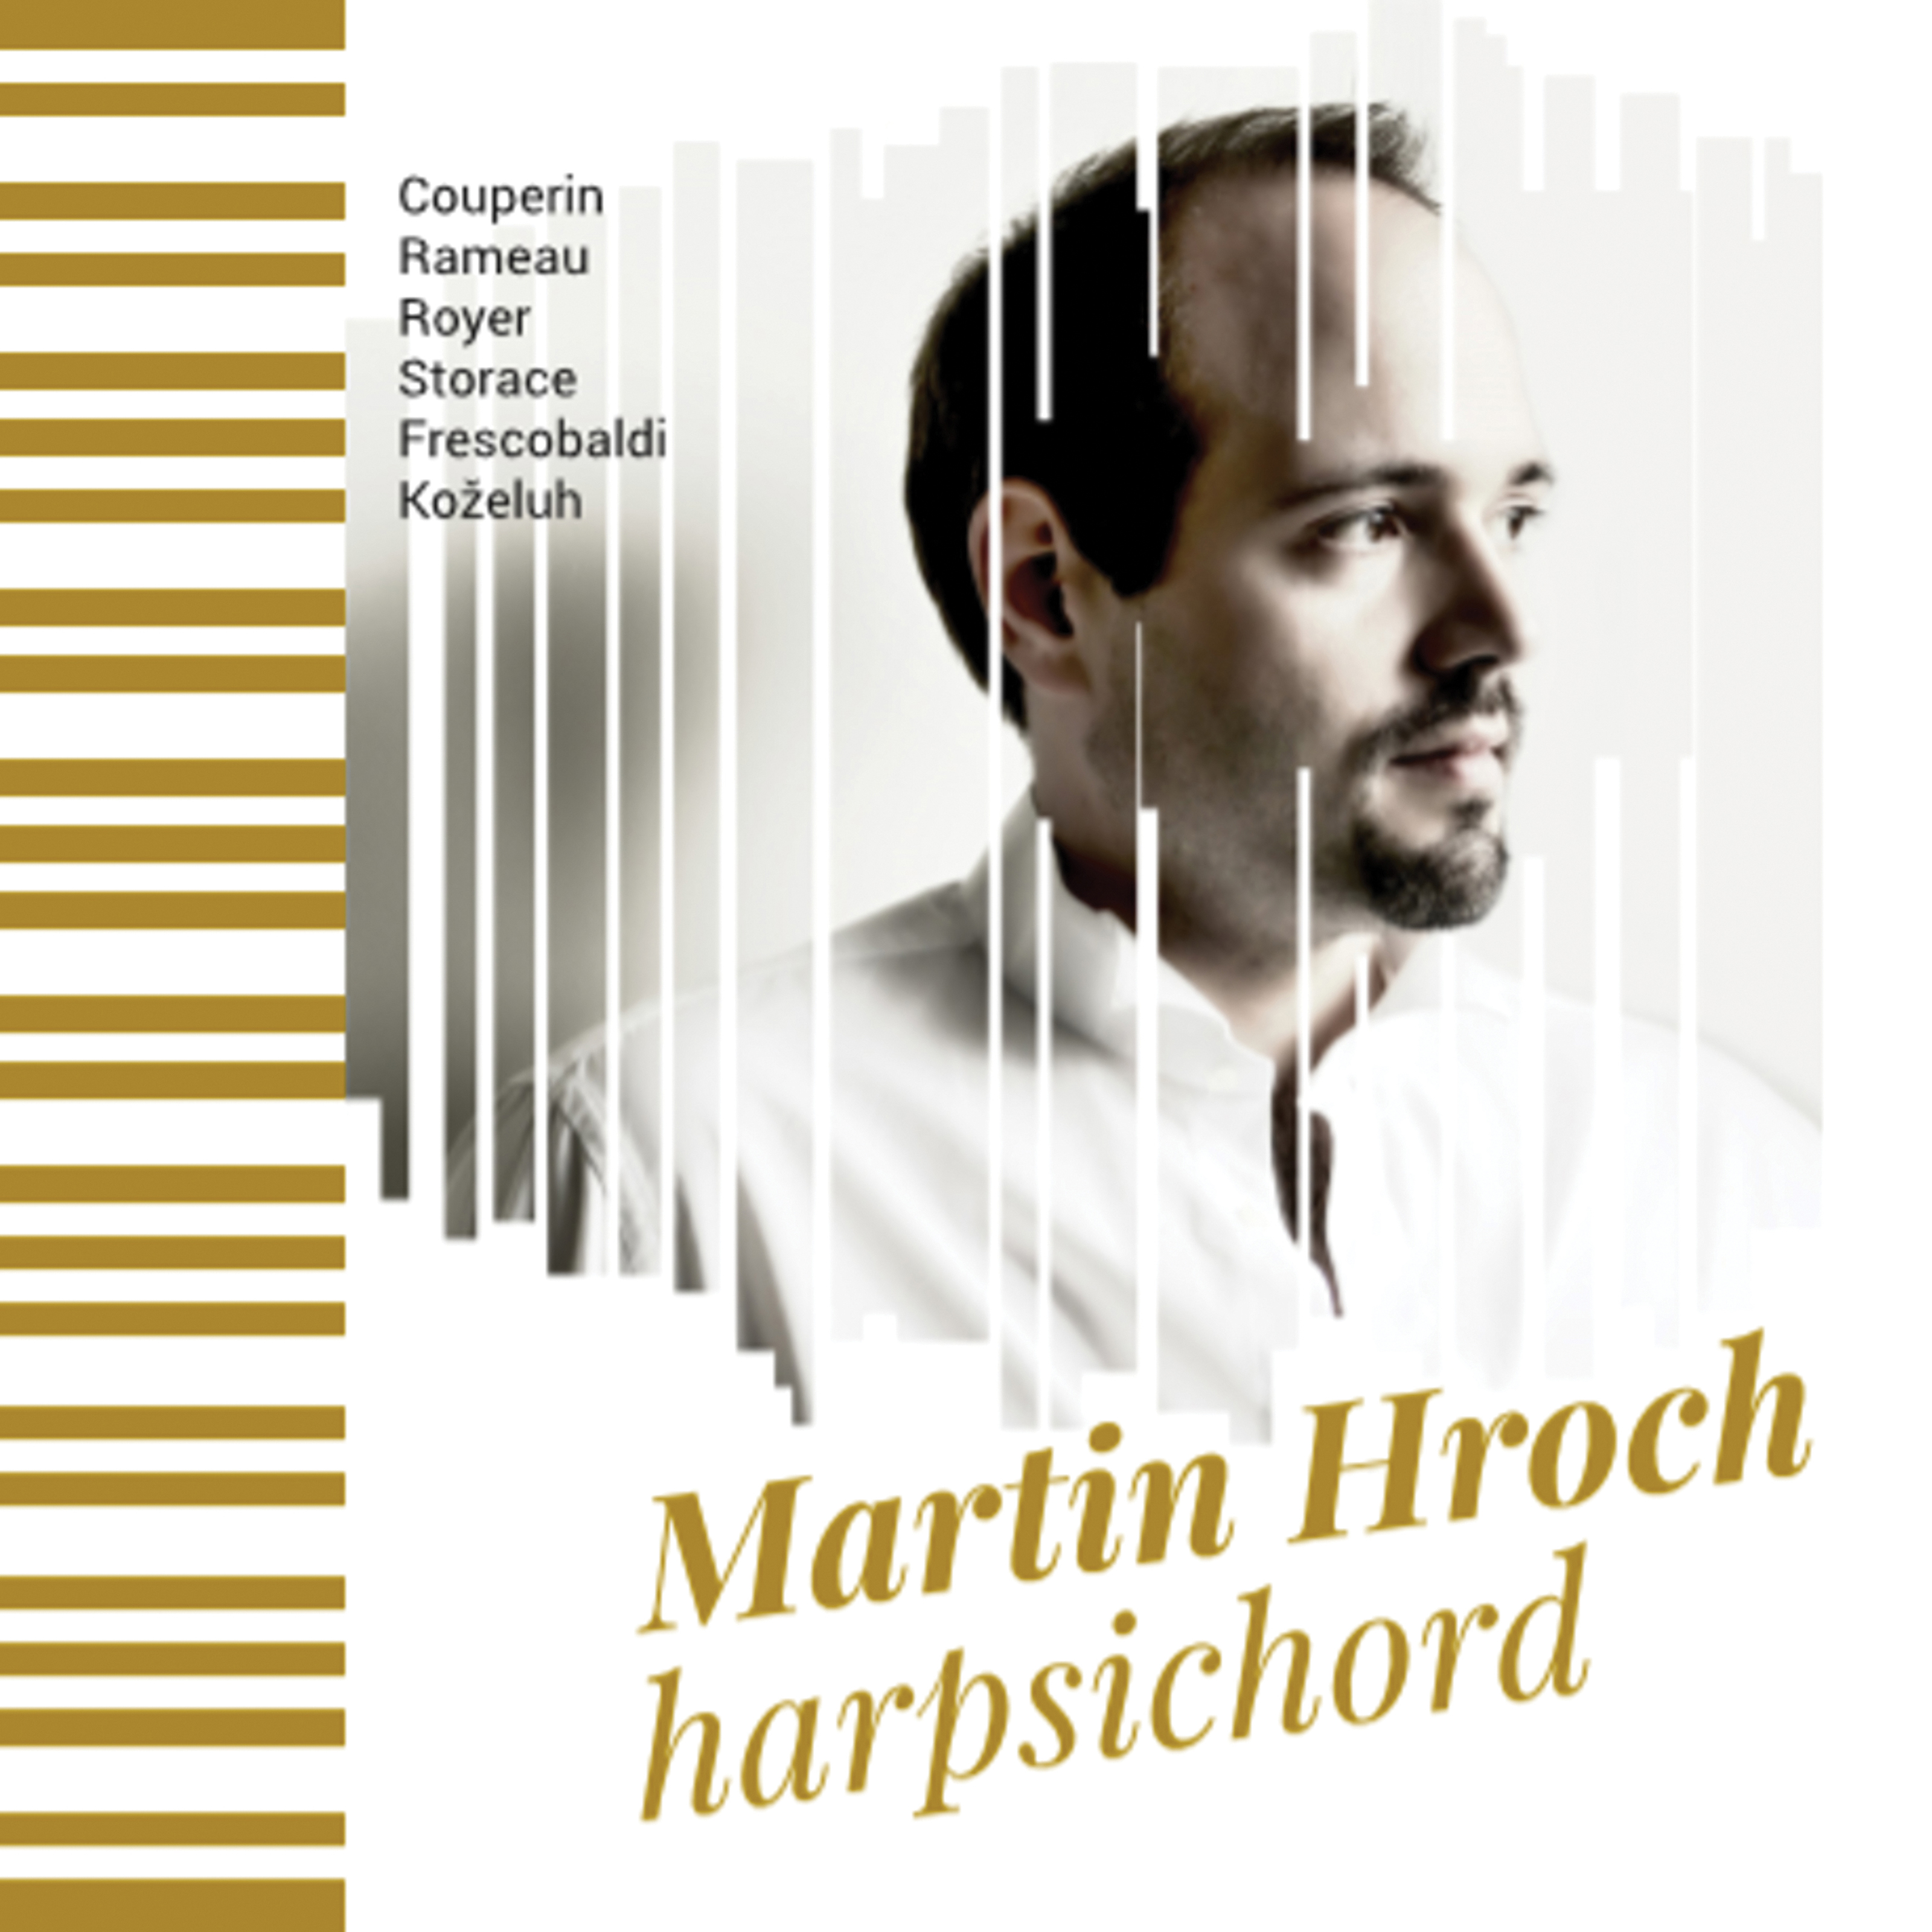 Couperin, Rameau, Royer & Others Works for Harpsichord - Martin Hroch